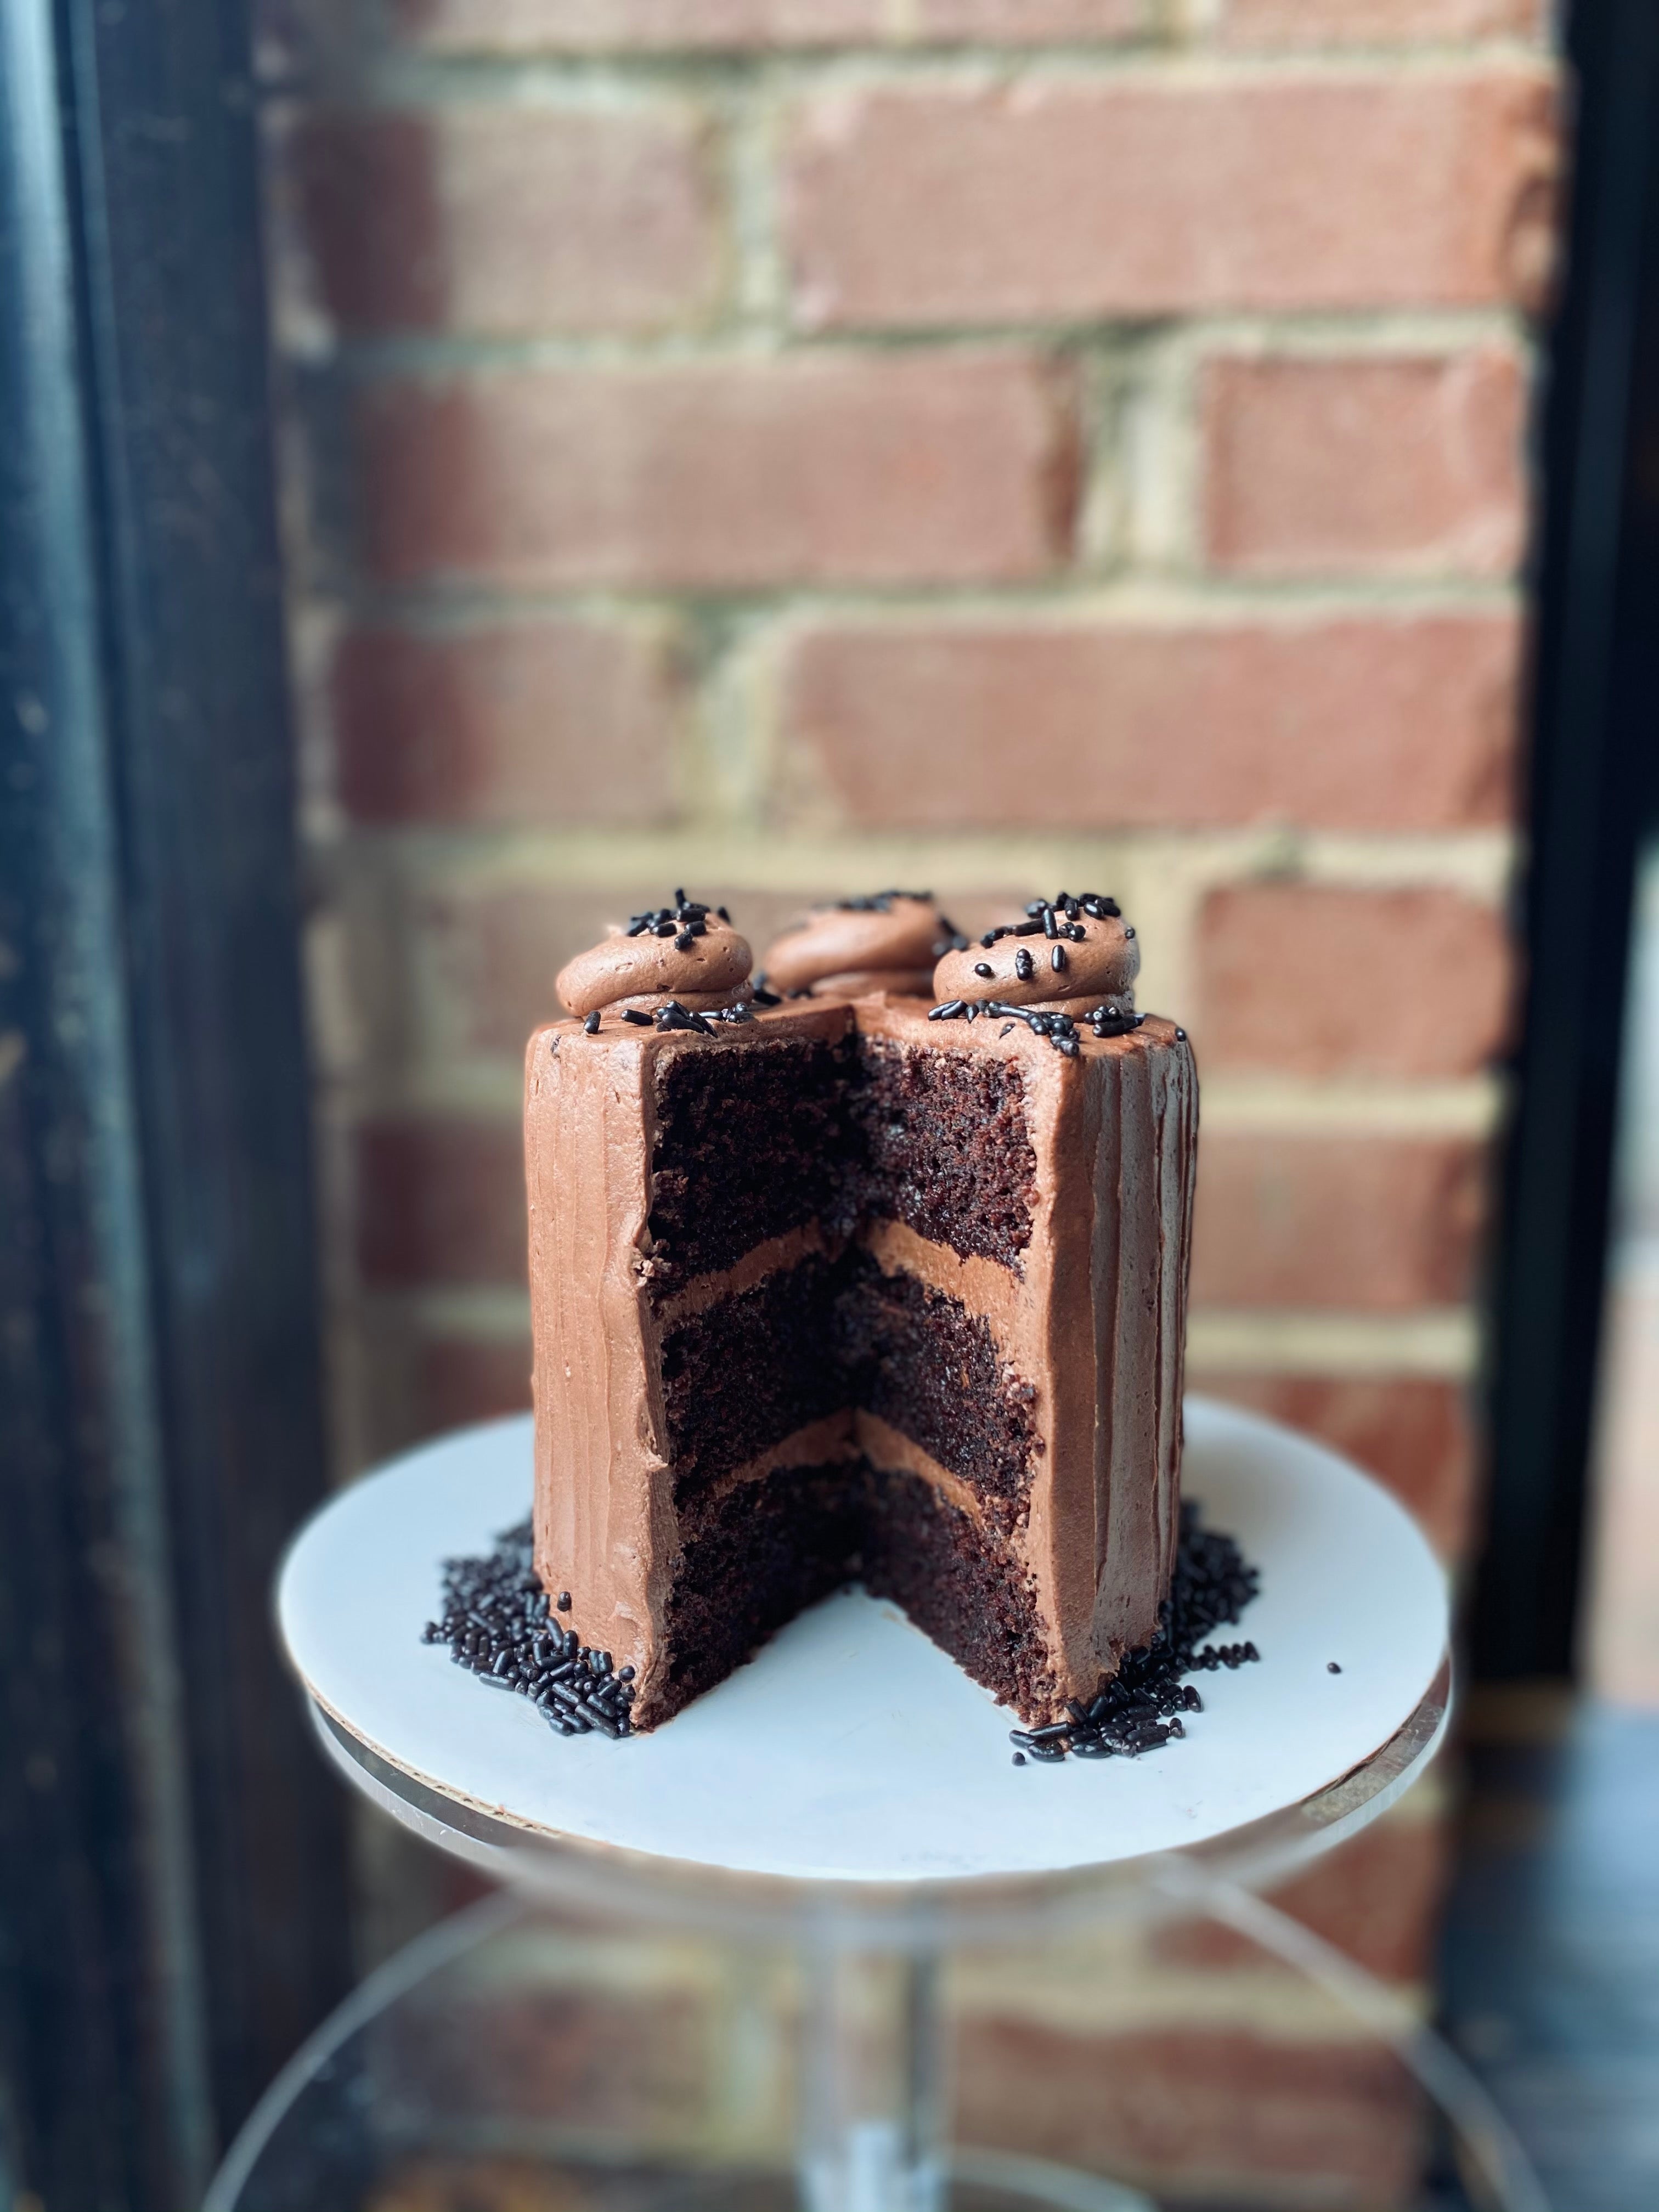 Chocolate cake with chocolate buttercream frosting.